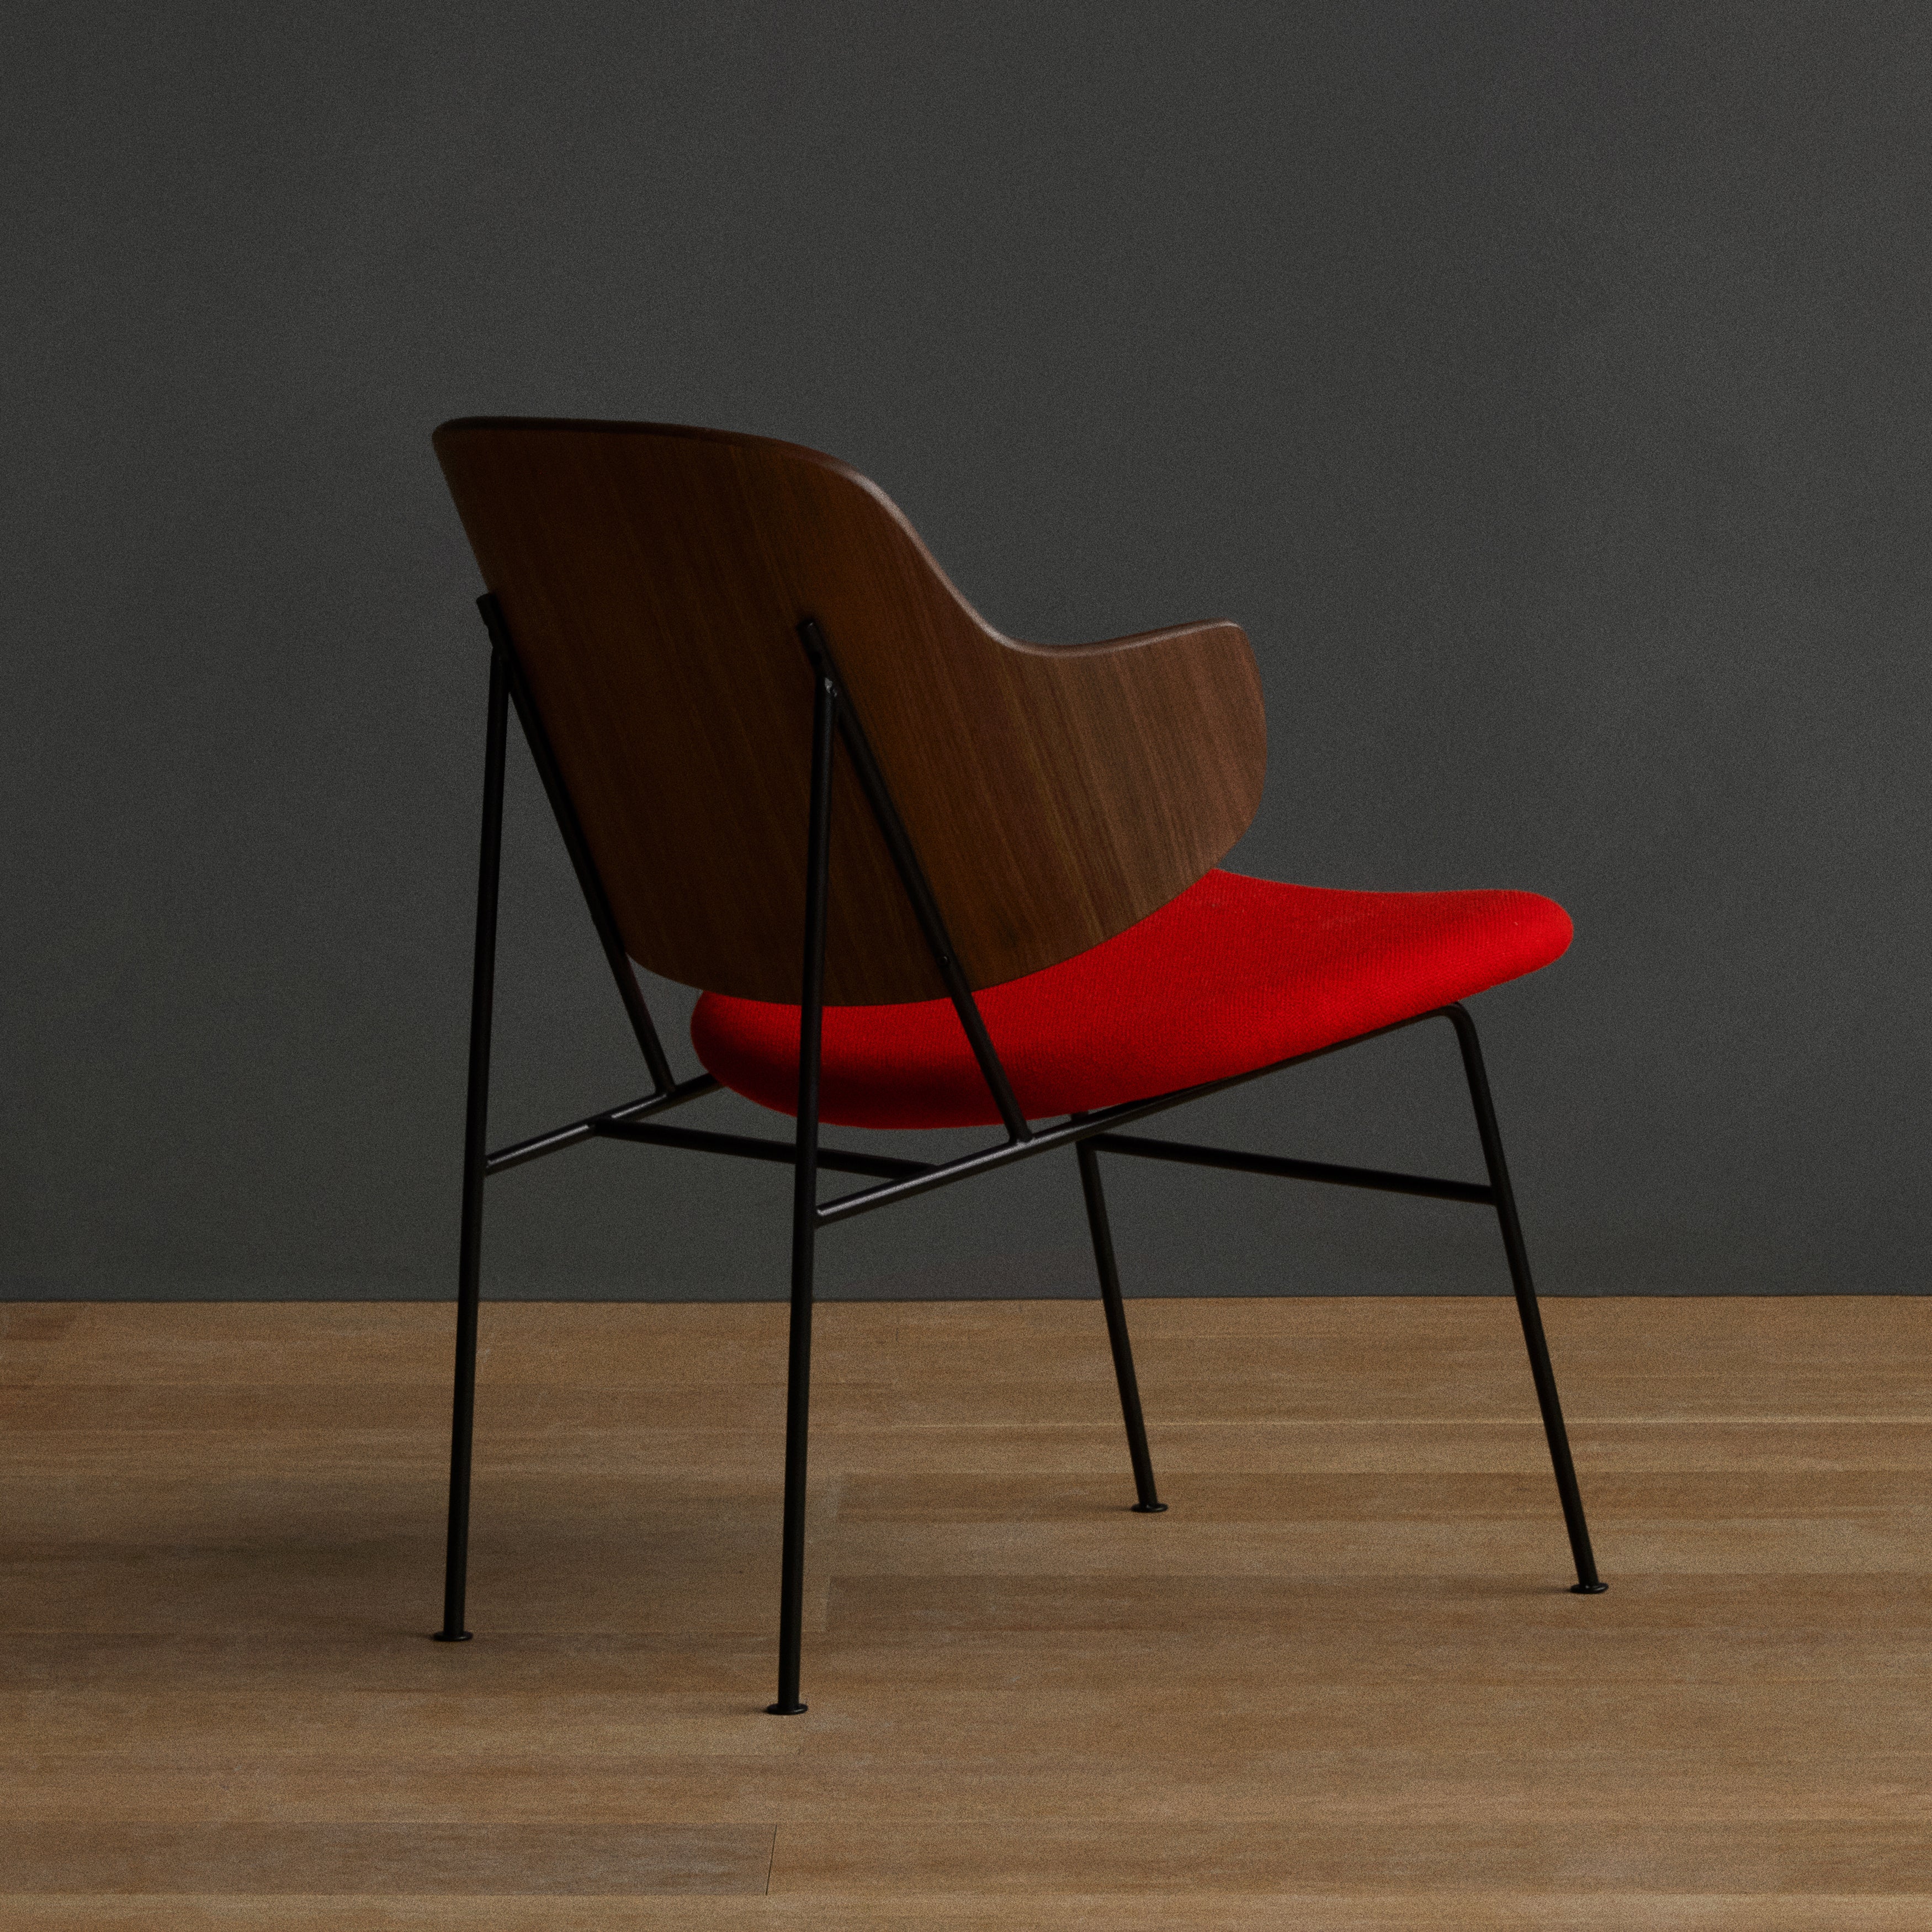 The Penguin Lounge Chair: Upholstered